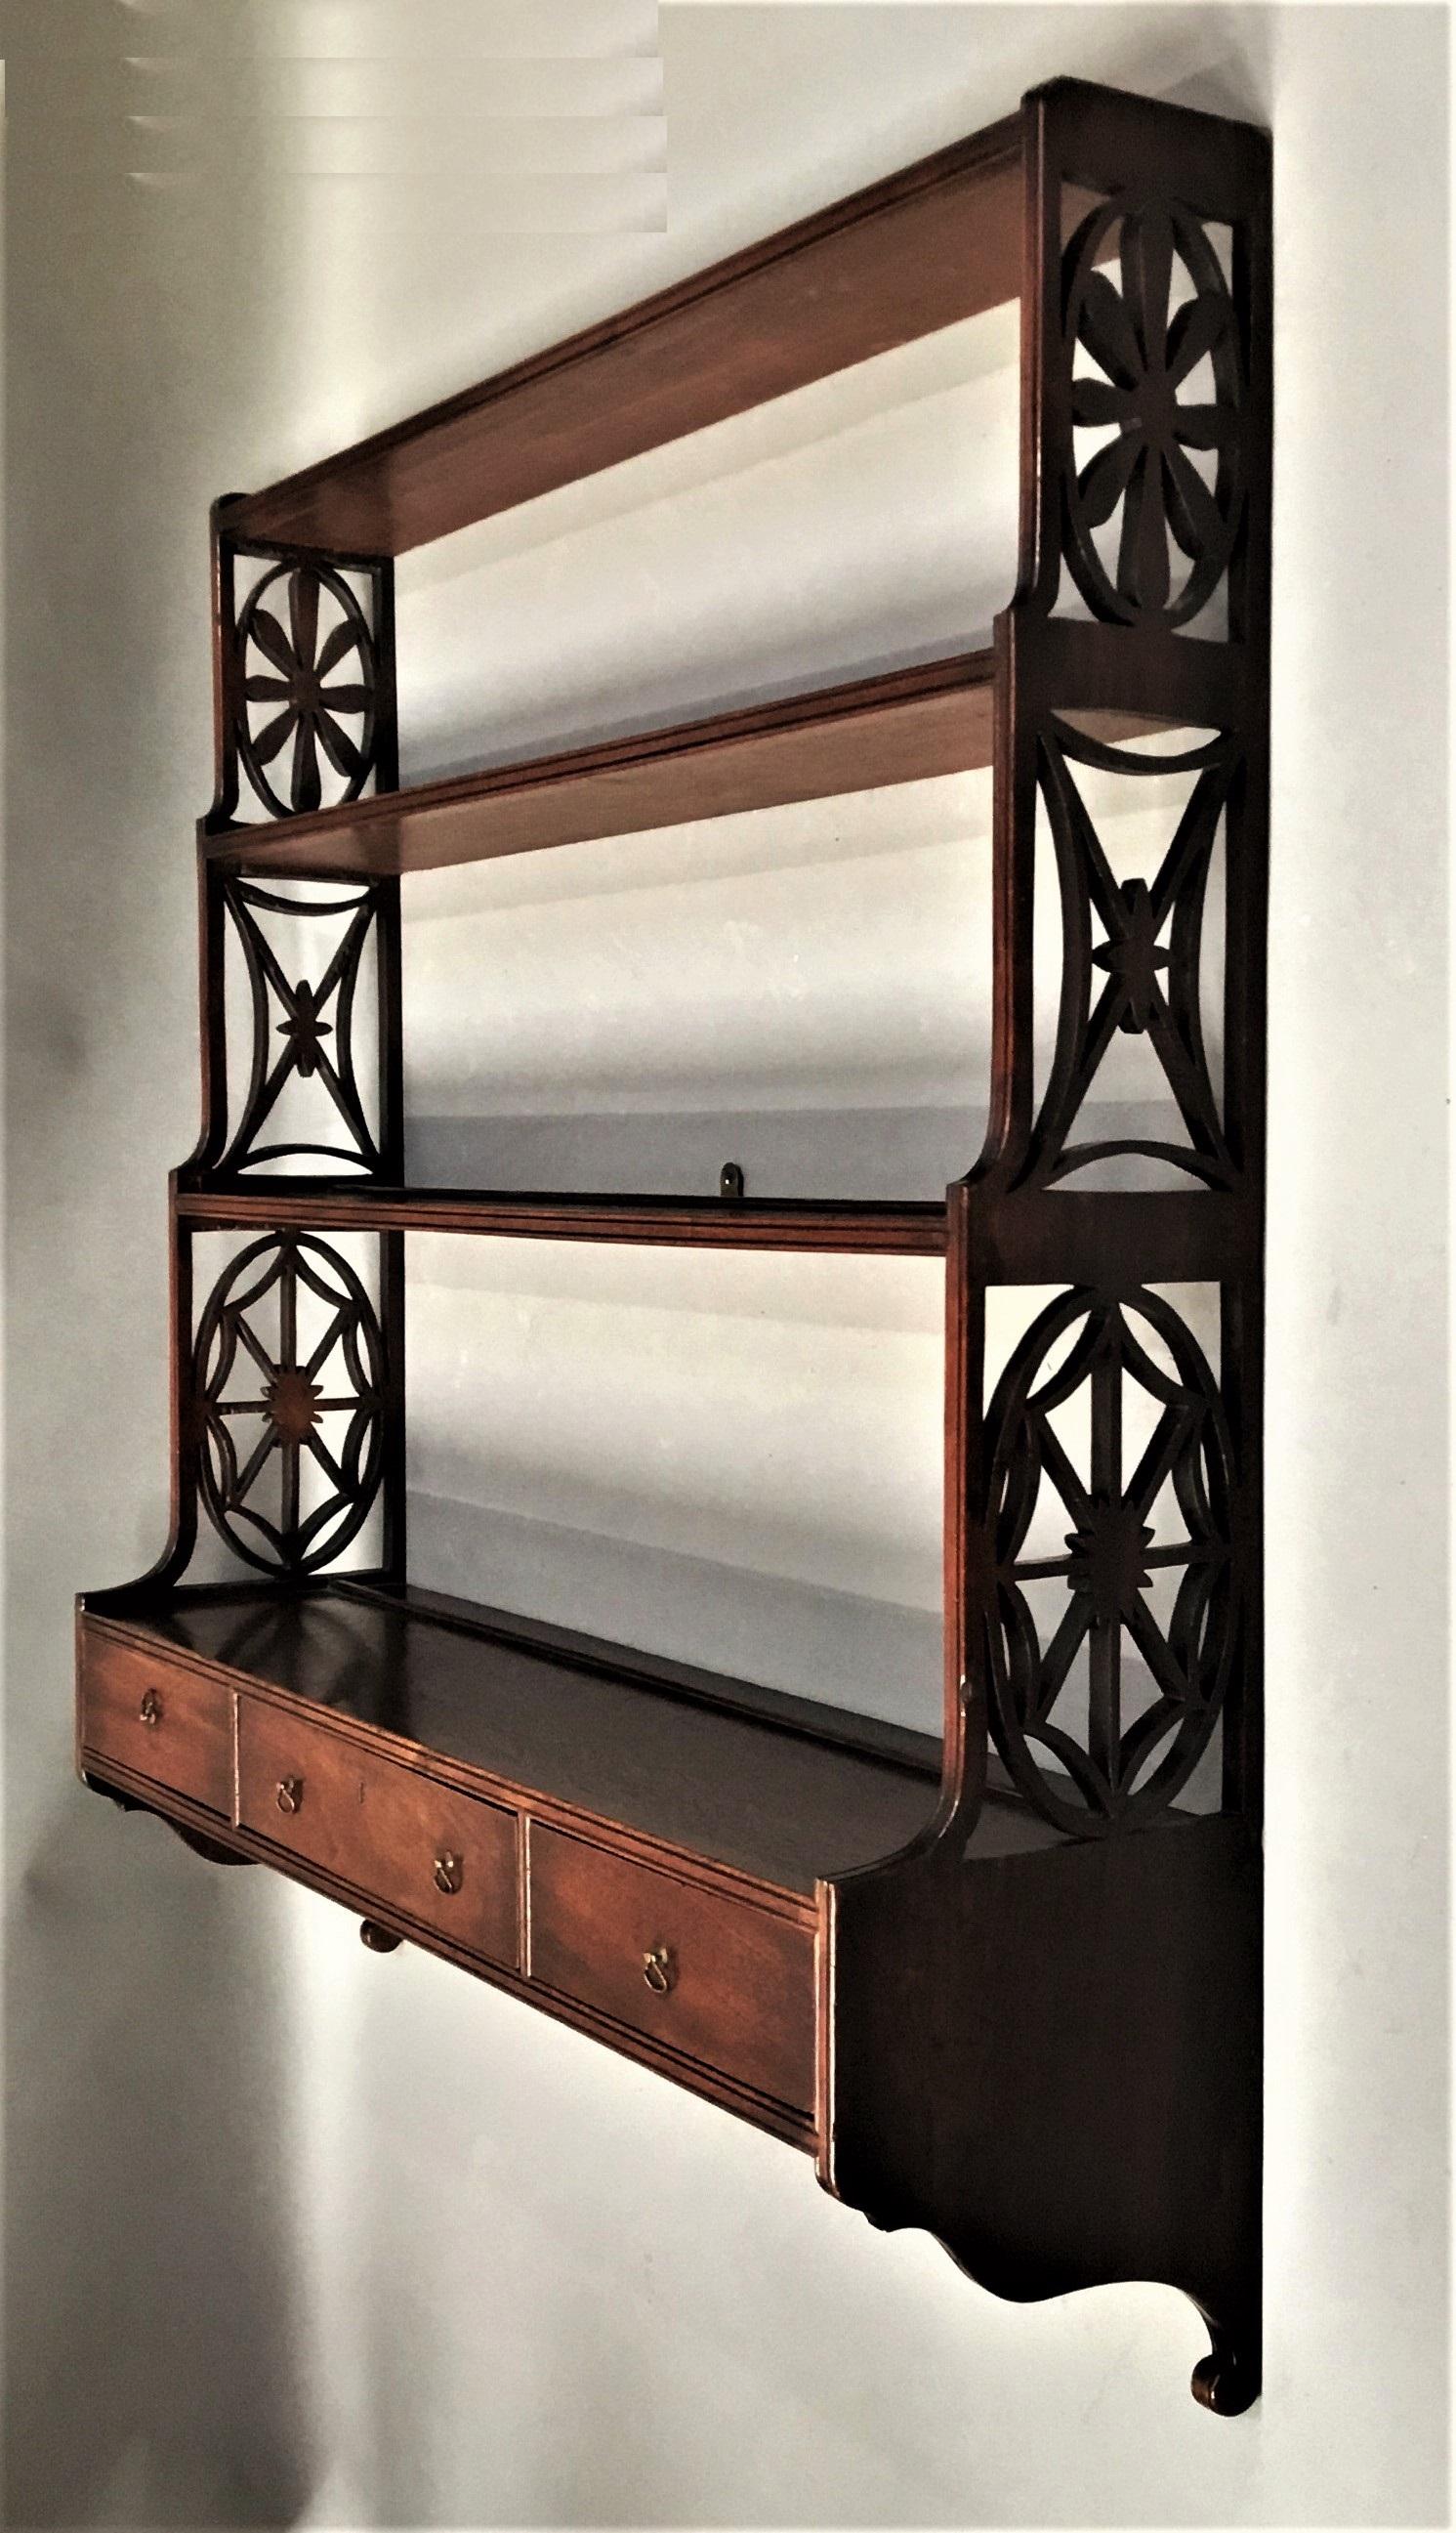 Polished George III Mahogany Set of 'Chippendale' Hanging Wall Shelves For Sale